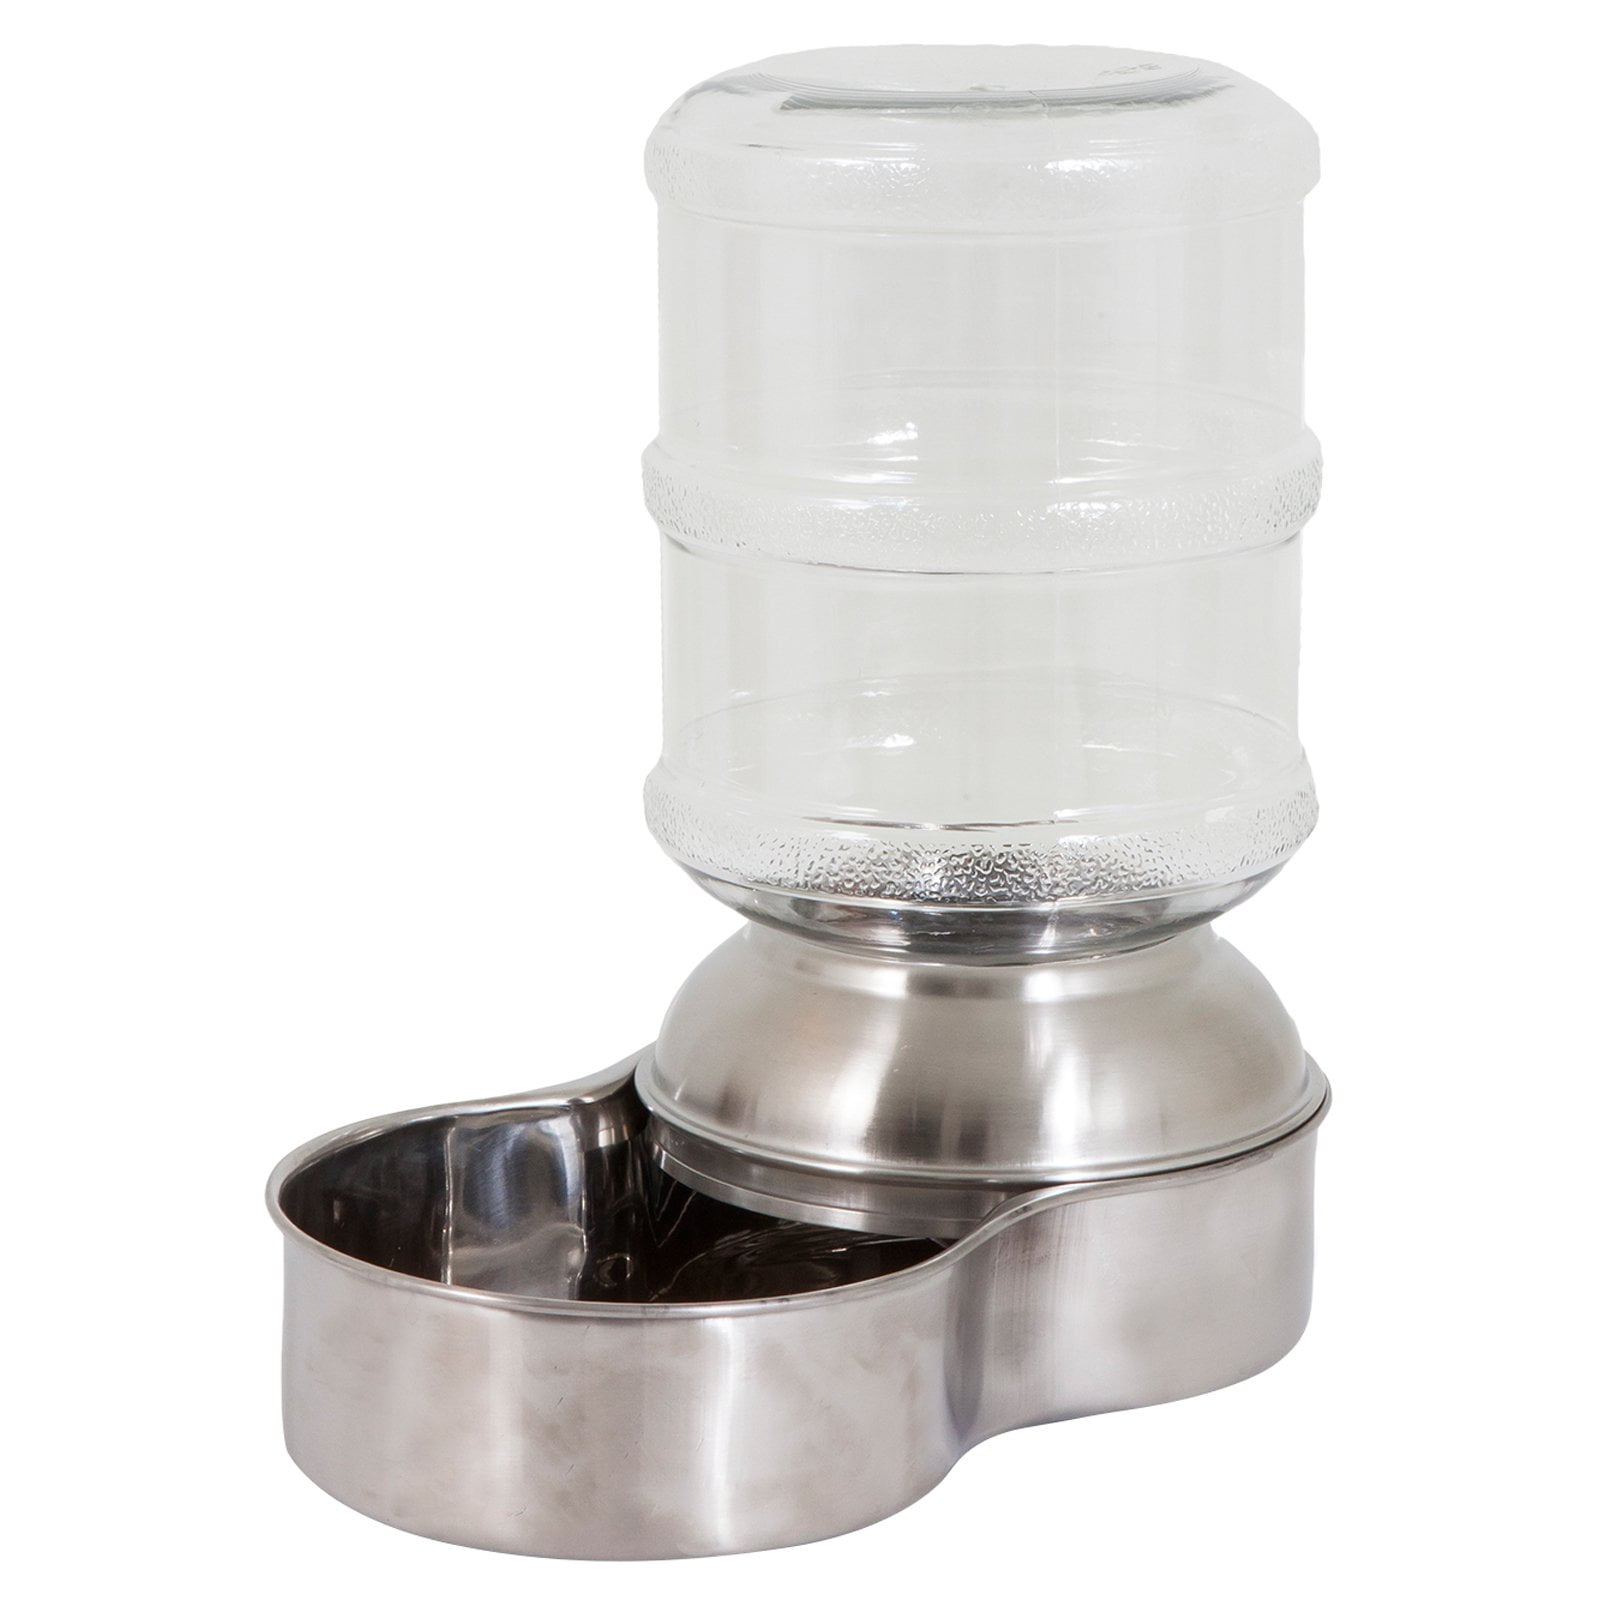 Petmate Small Stainless Steel Replendish Pet Waterer - Walmart.com Petmate Stainless Steel Replendish Waterer